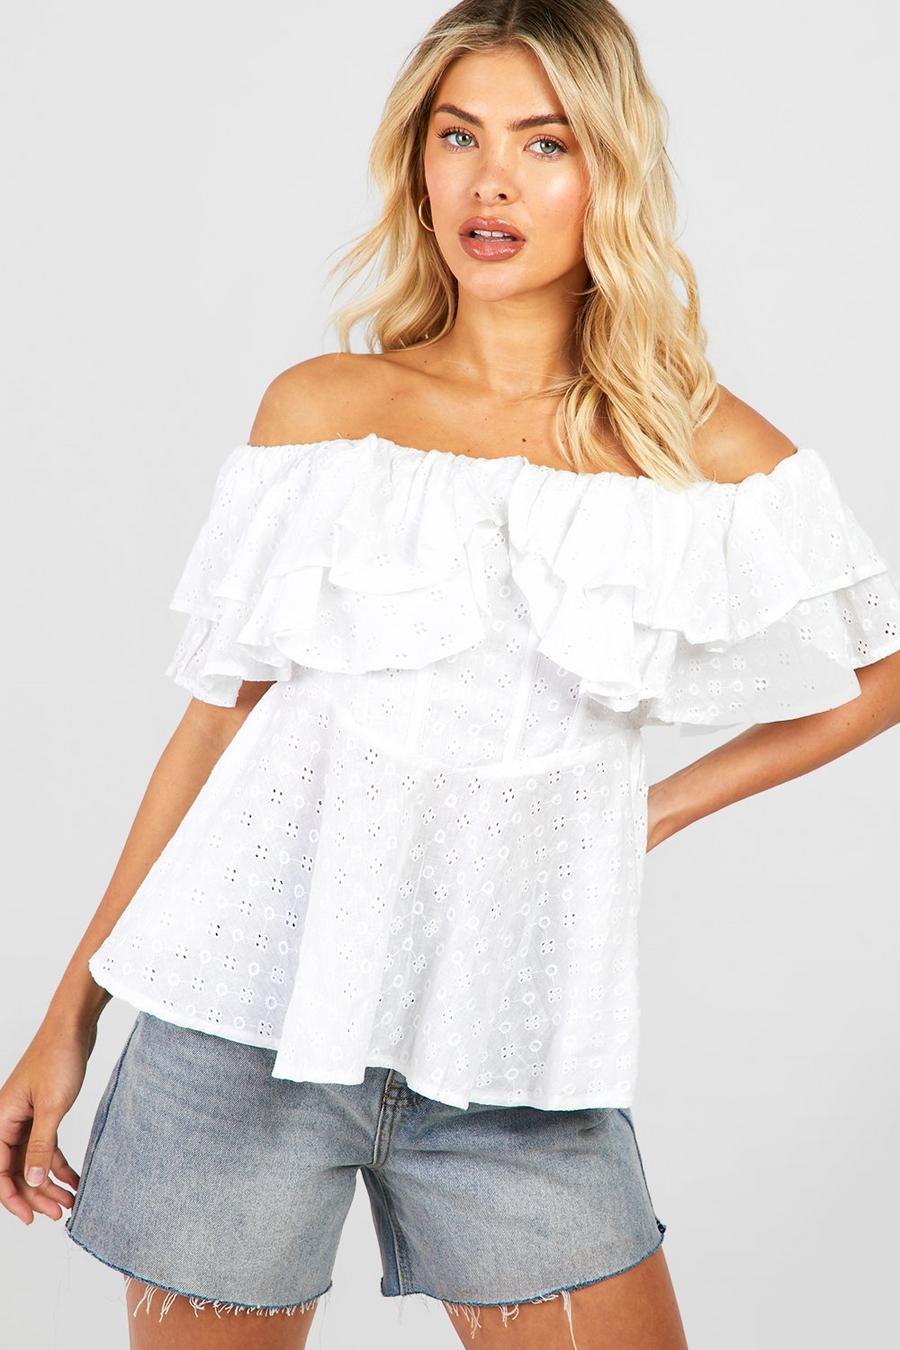 White Ruffle Off The Shoulder Eyelet Corset Top